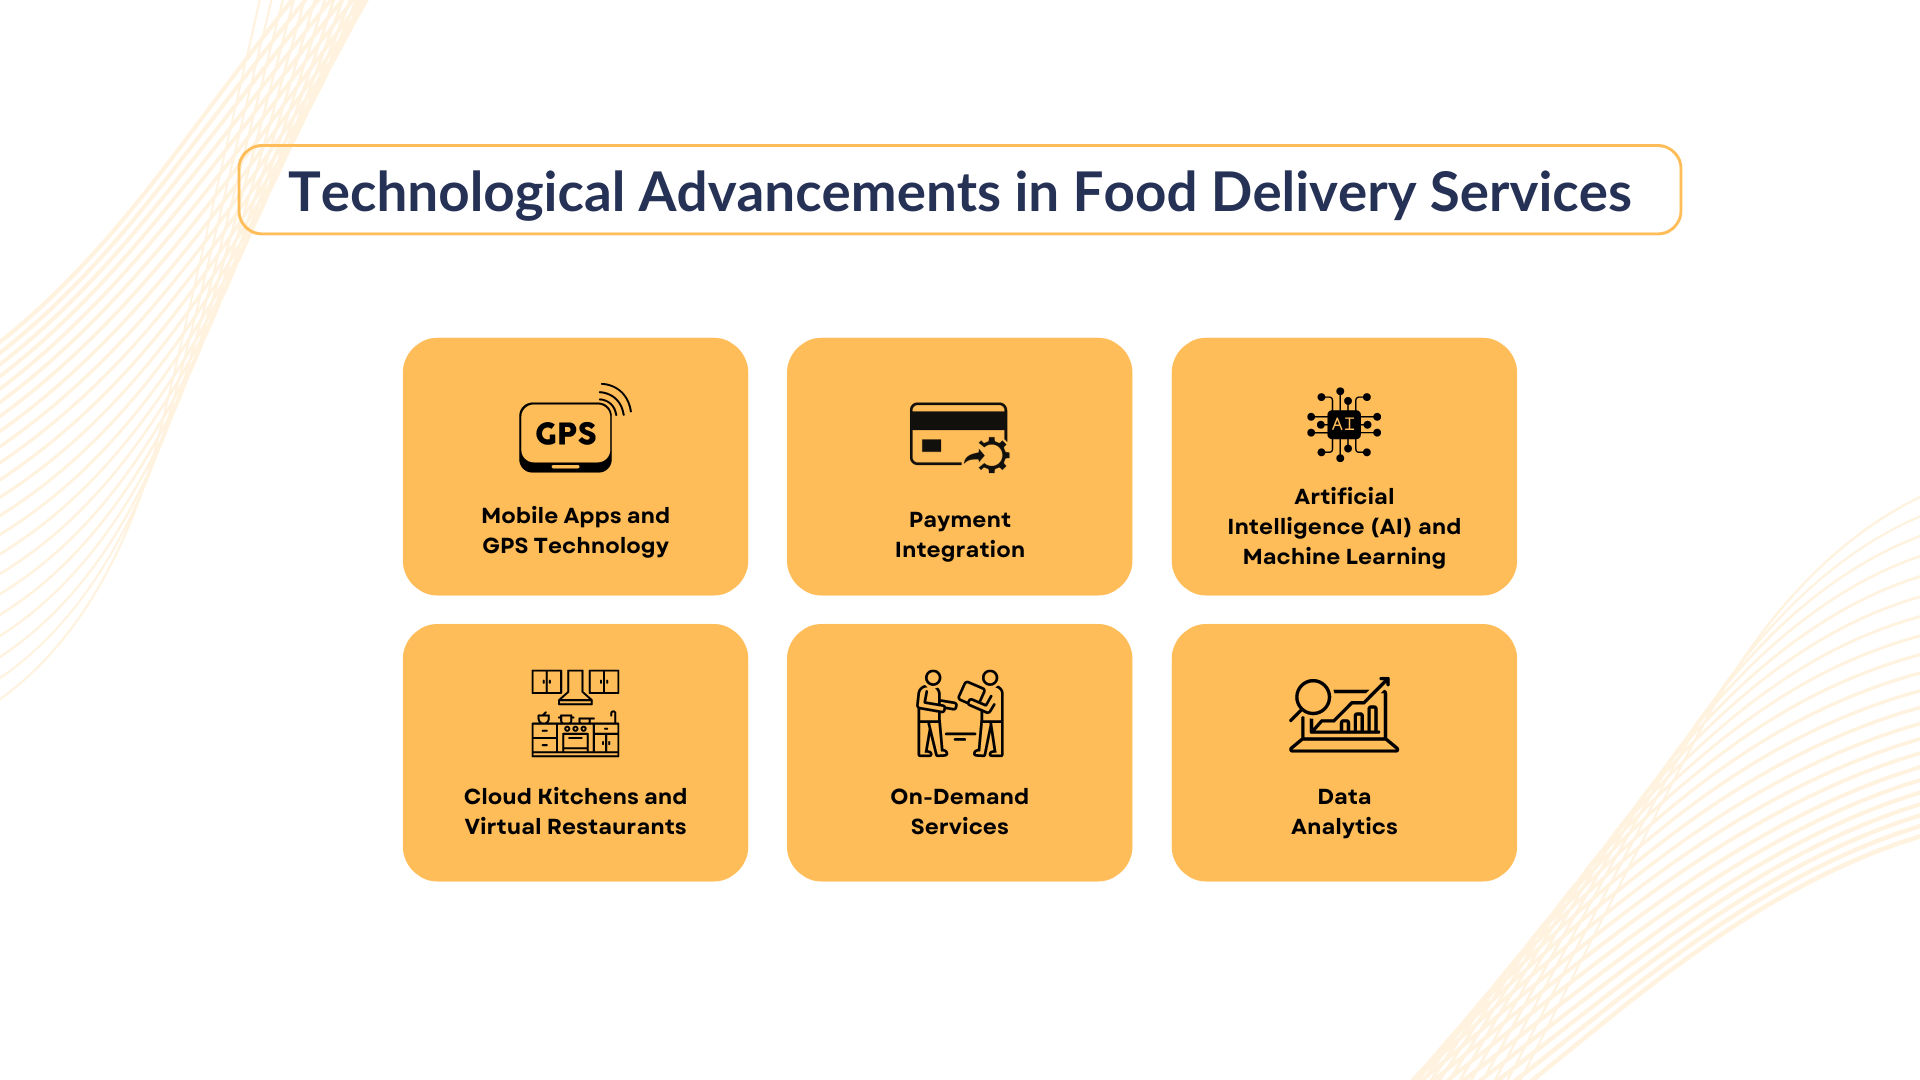 Technological Advancements in Food Delivery Services